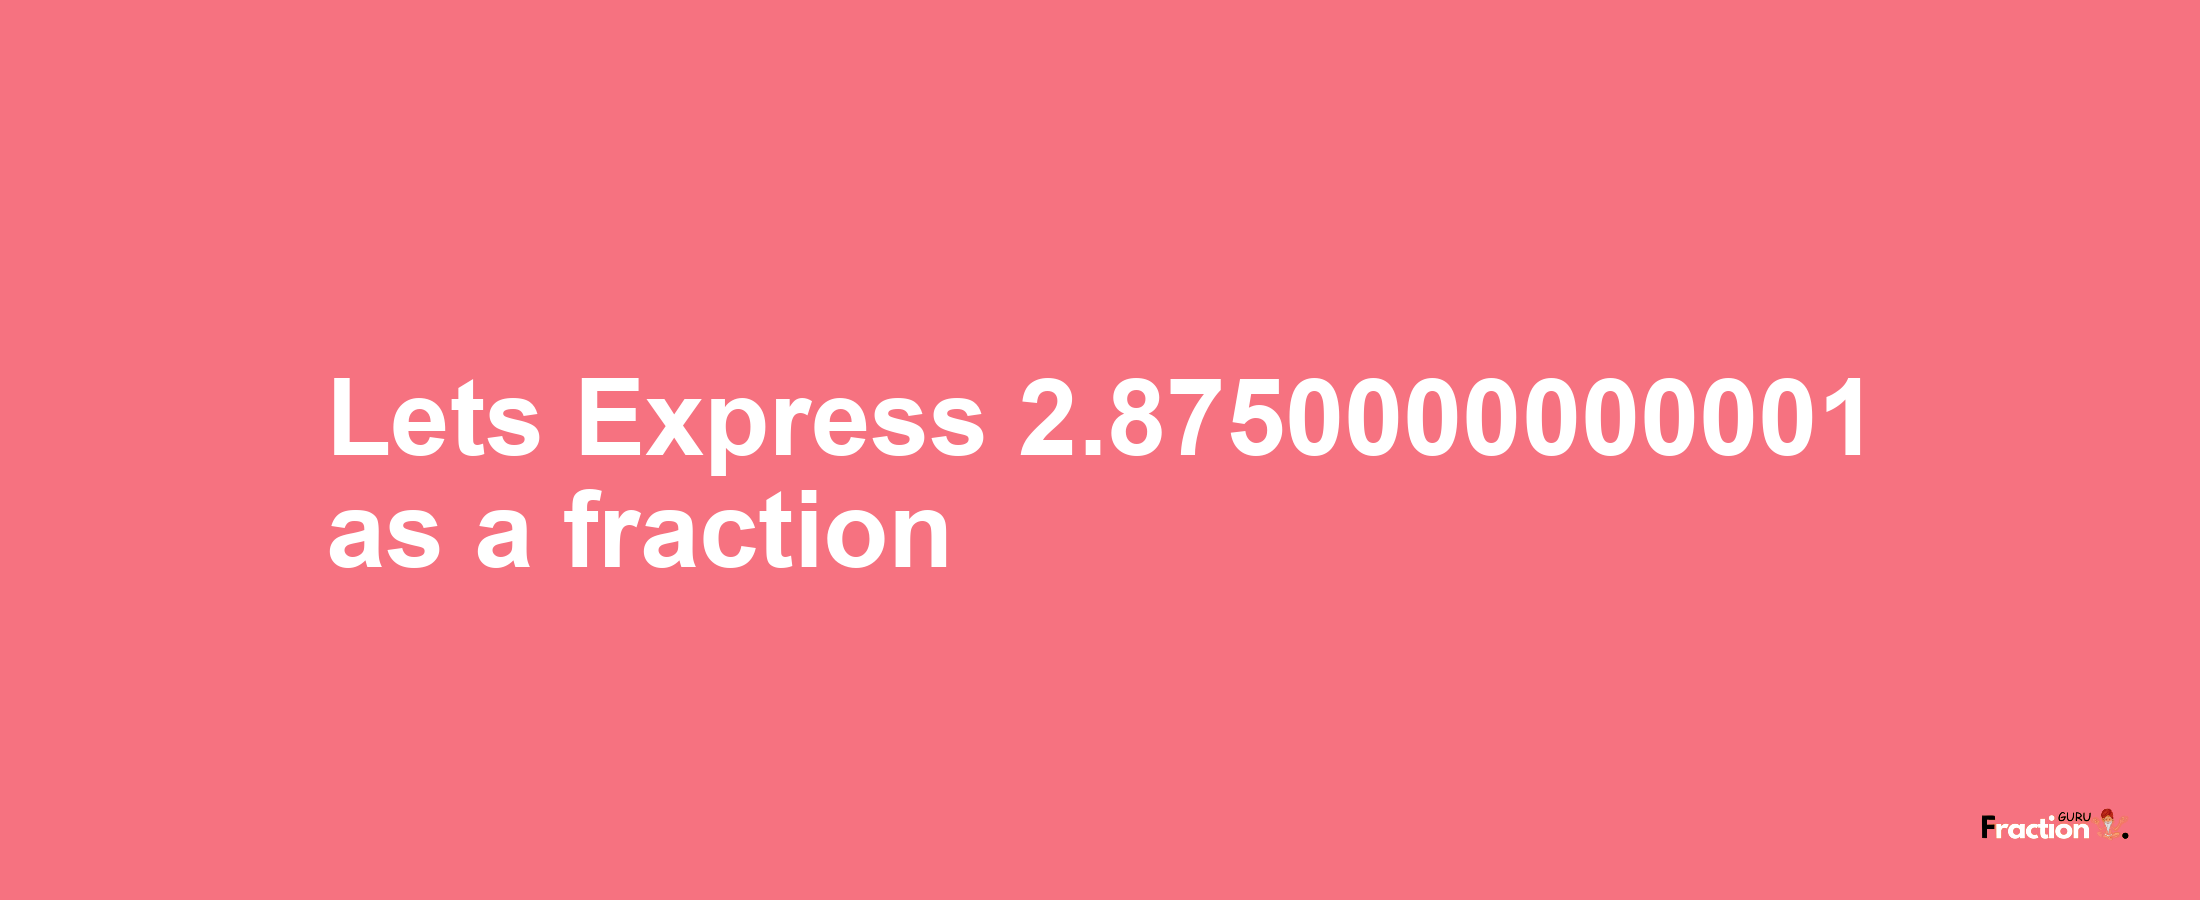 Lets Express 2.8750000000001 as afraction